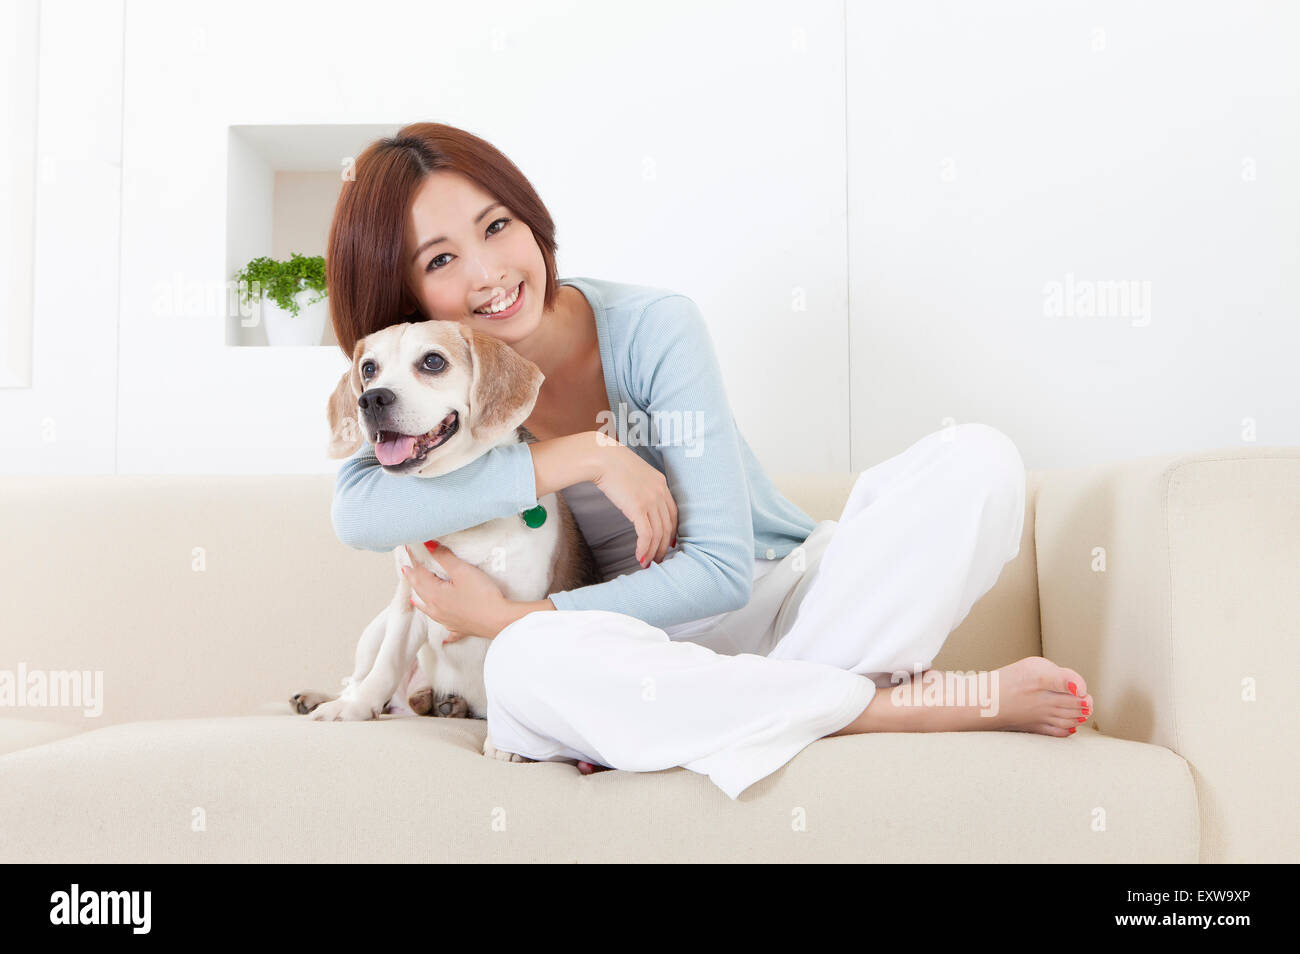 Young woman sitting on the sofa with her dog and smiling at the camera, Stock Photo